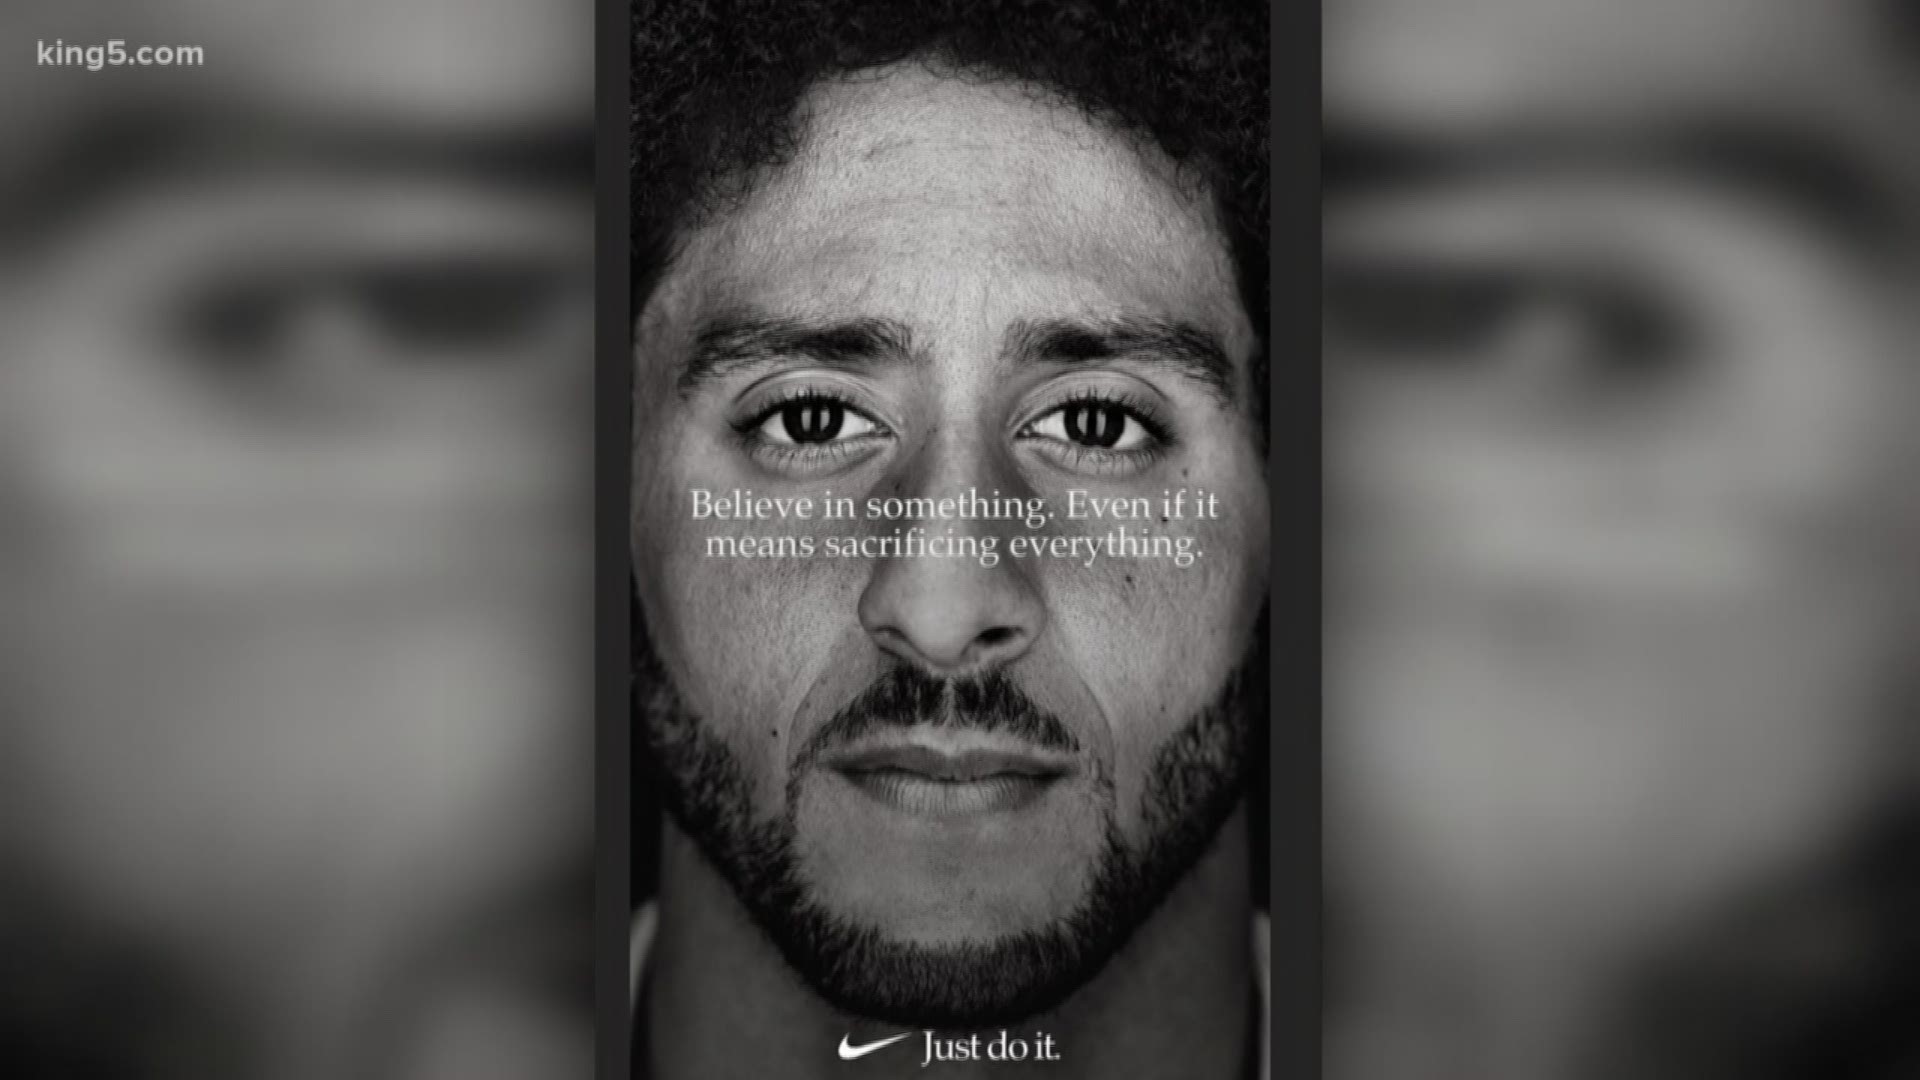 Absay Infrarrojo compromiso It didn't take the Internet long to make a bunch of hilarious memes after  Nike's 'Just Do It' ad | firstcoastnews.com